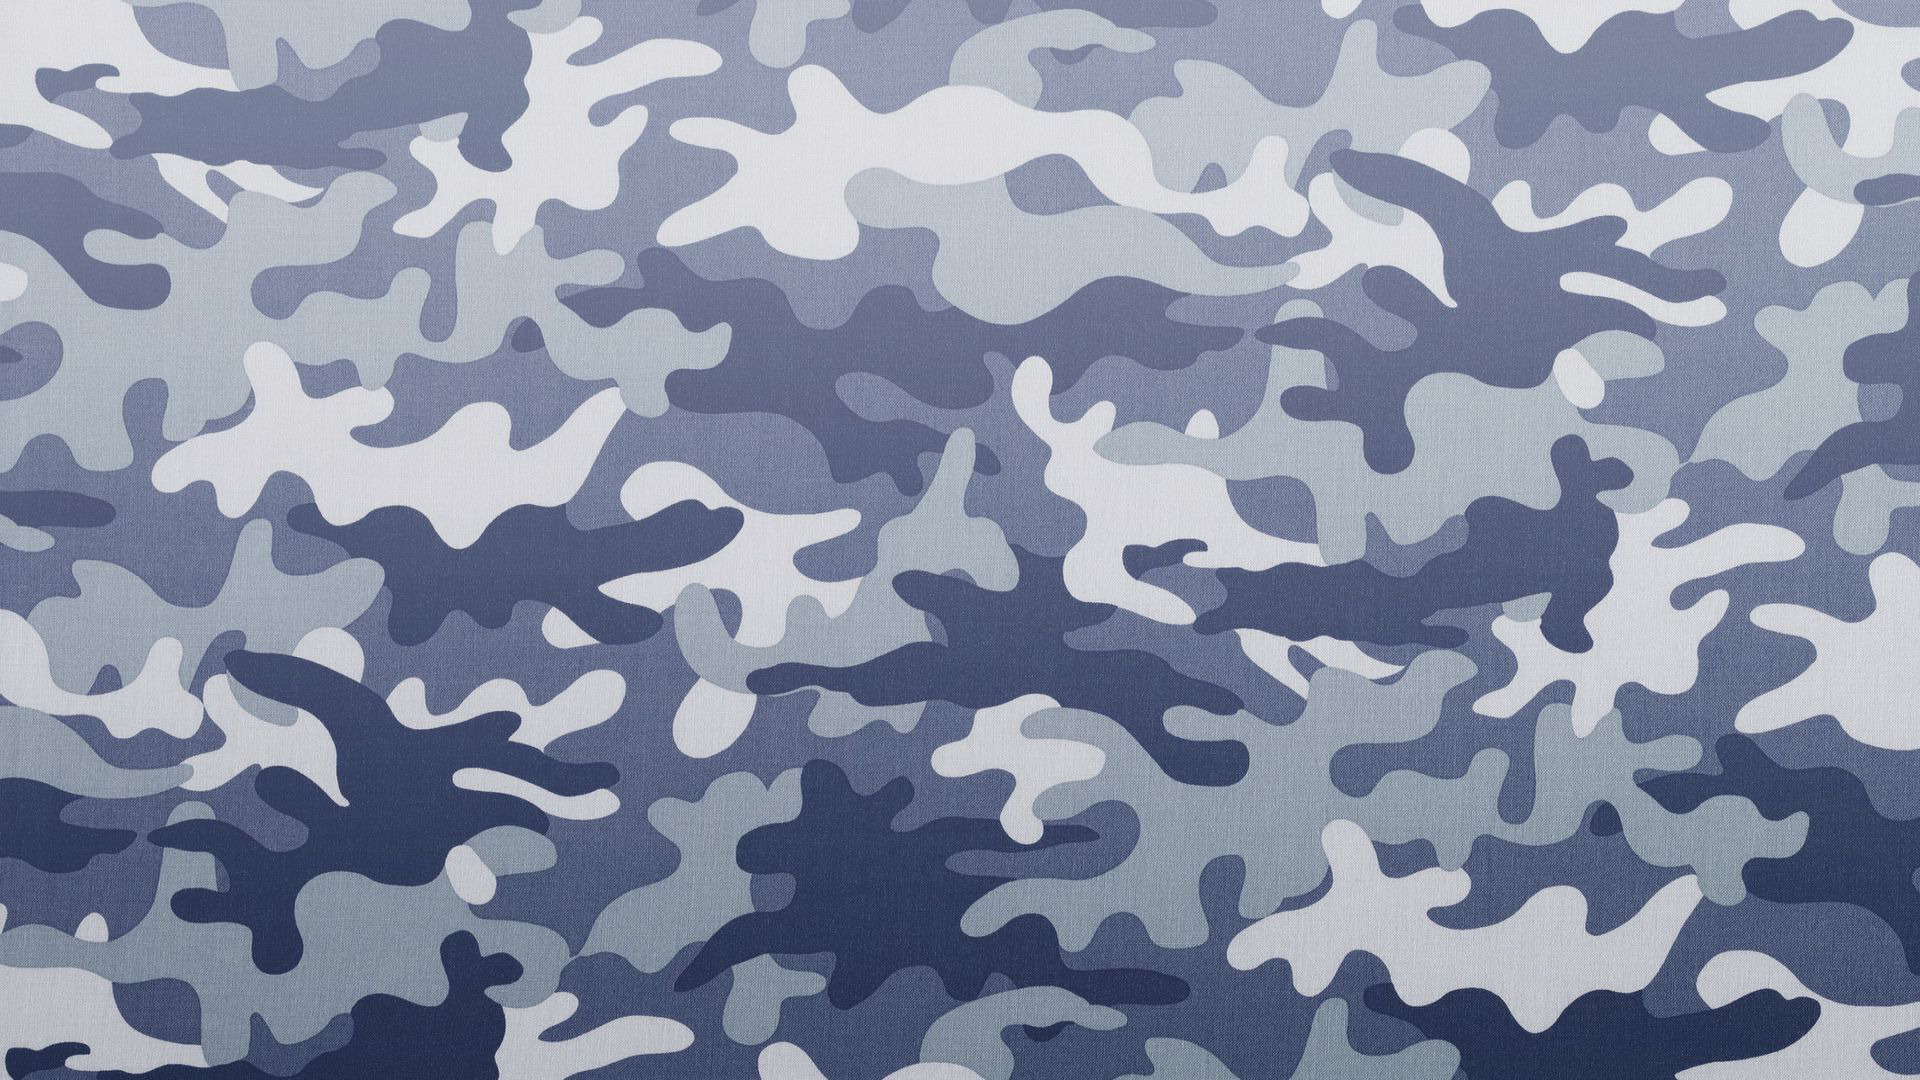 47 Camouflage Photos and Pictures RT88 HD Wallpapers